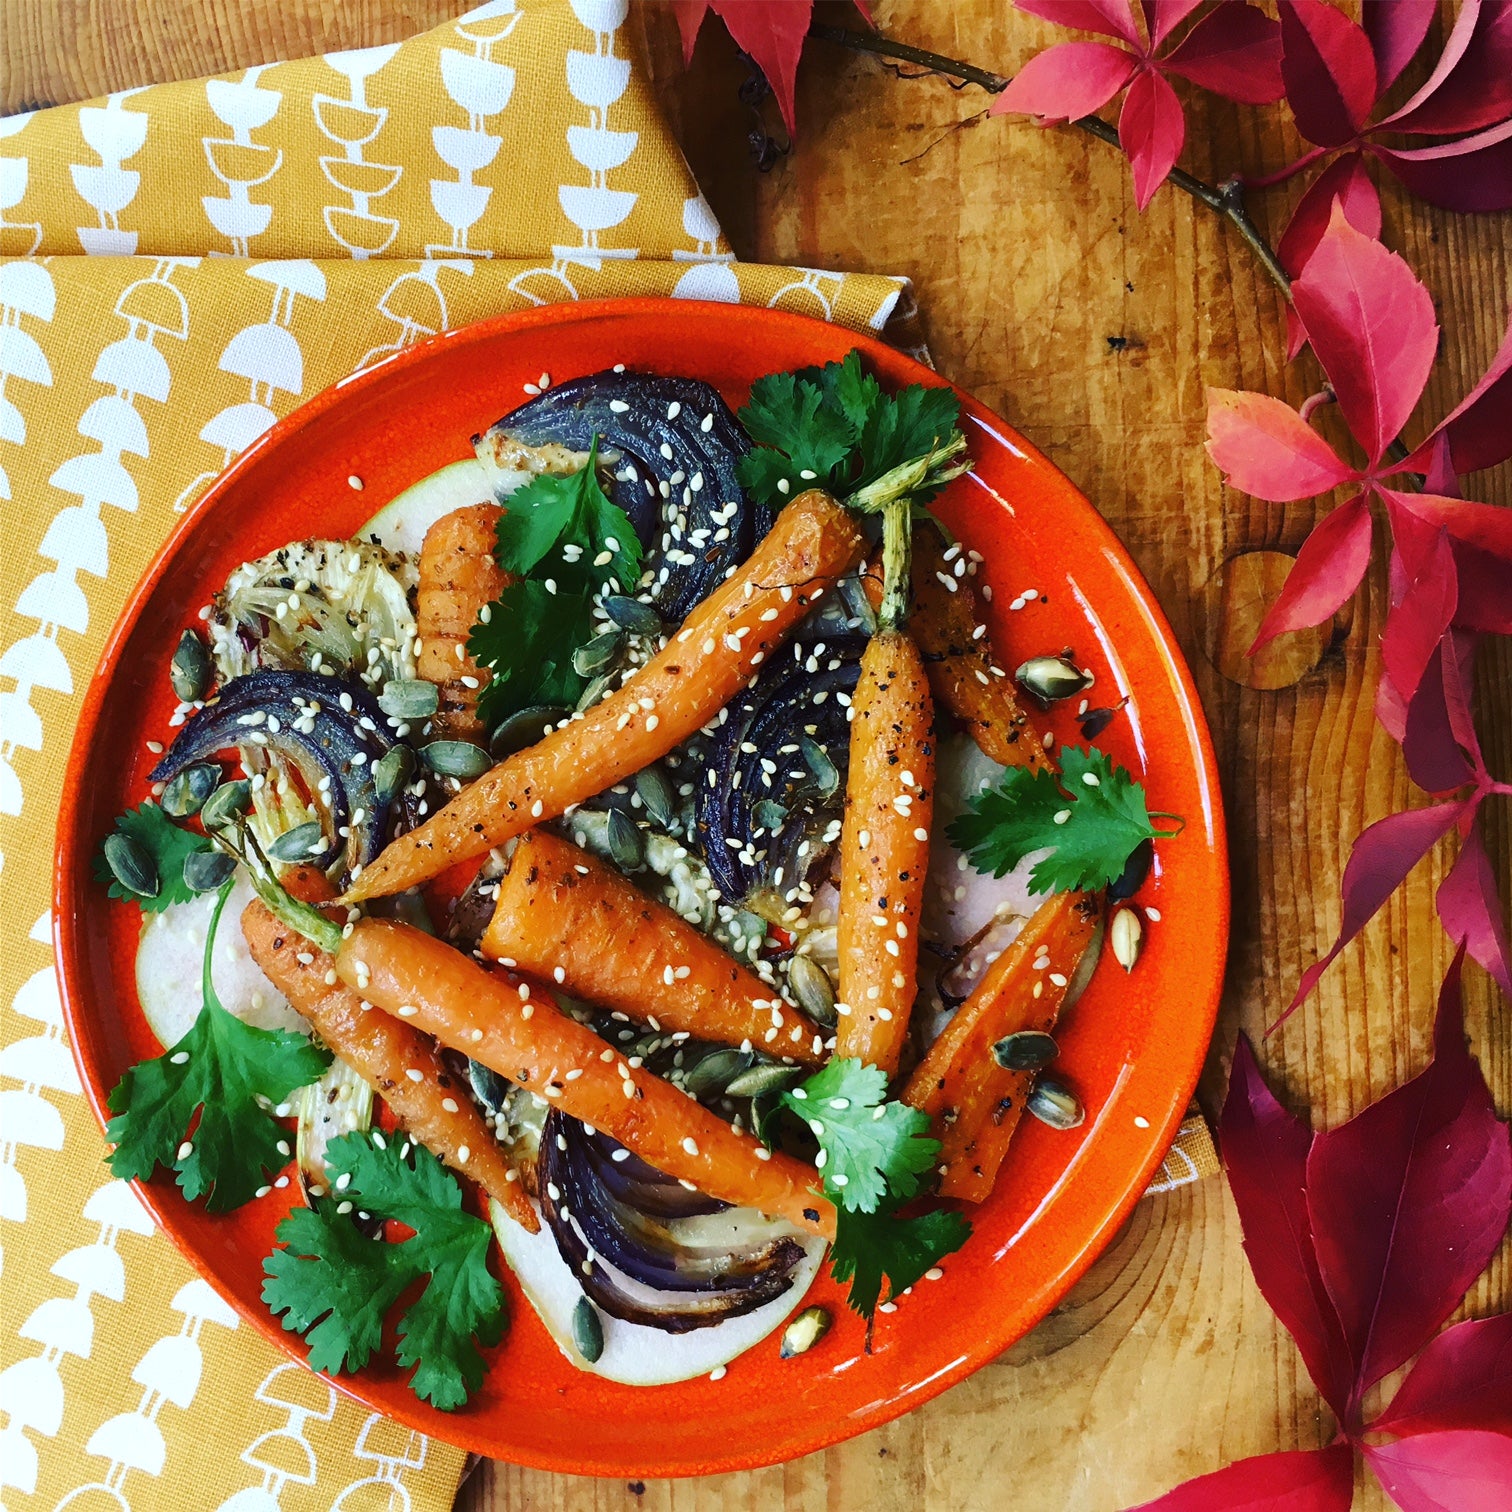 Carrot and Fennel Salad Recipe